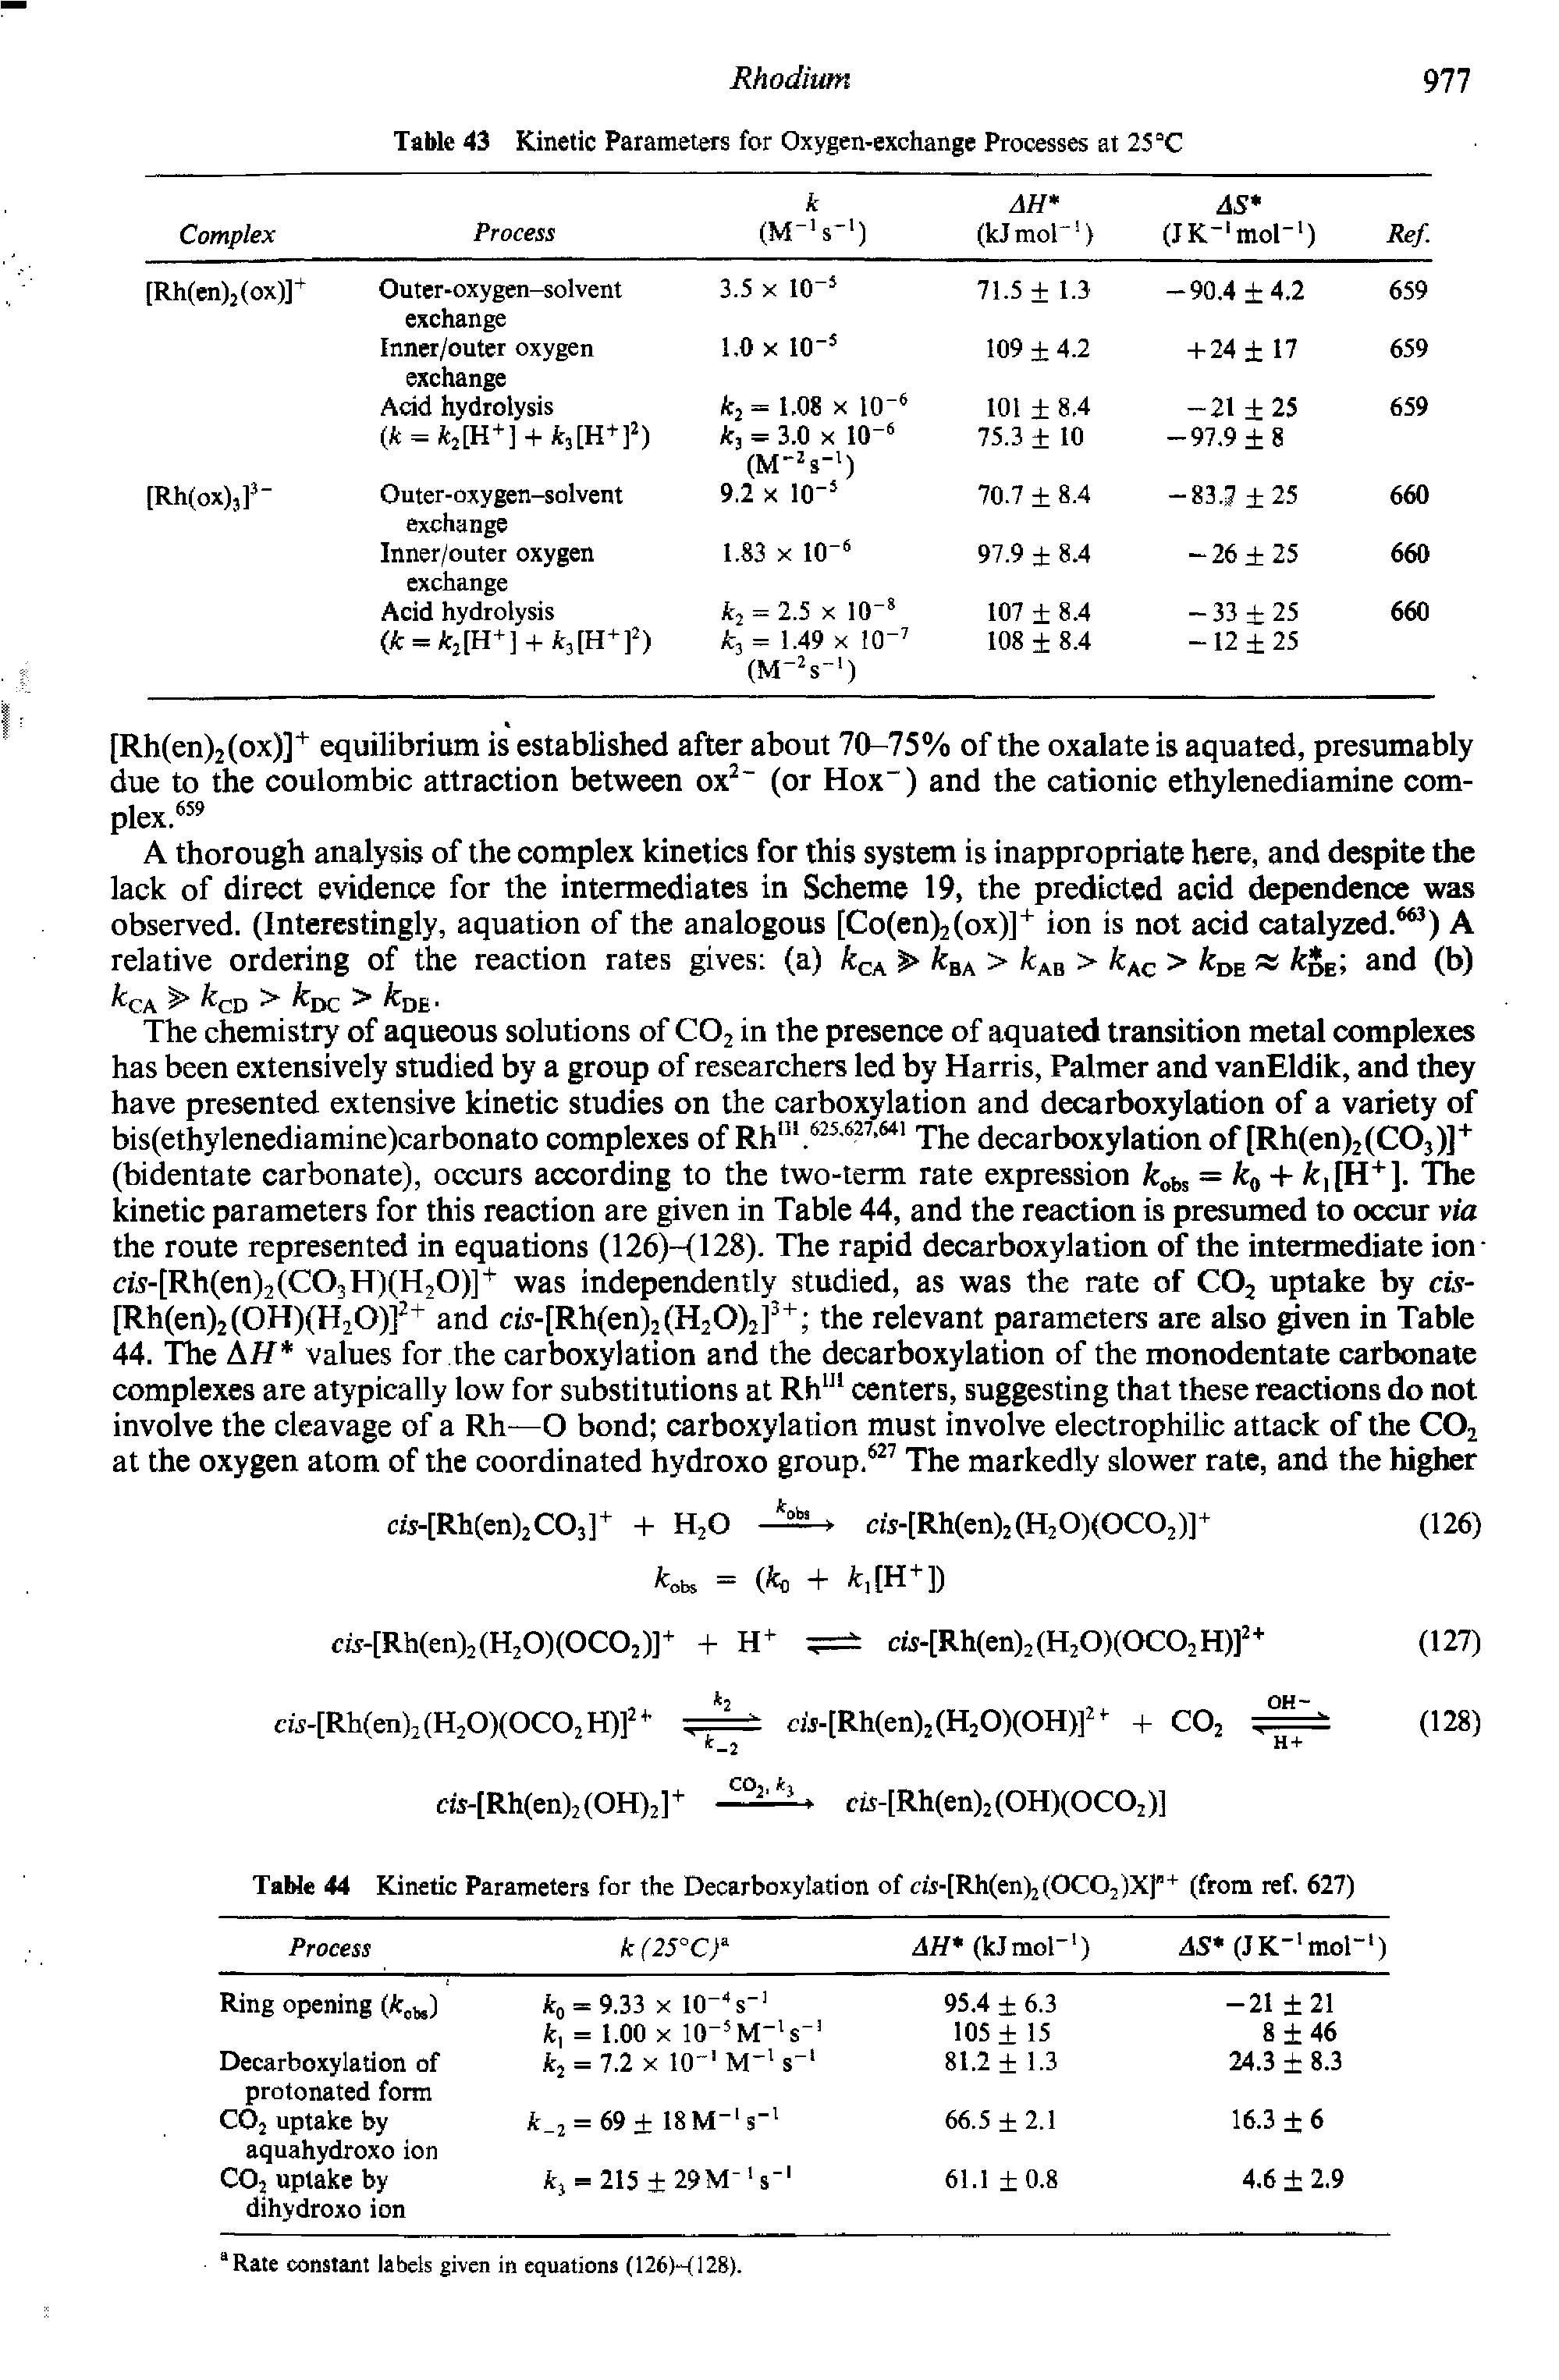 Table 44 Kinetic Parameters for the Decarboxylation of c/s-[Rh(en)2(OC02)X)n + (from ref, 627)...